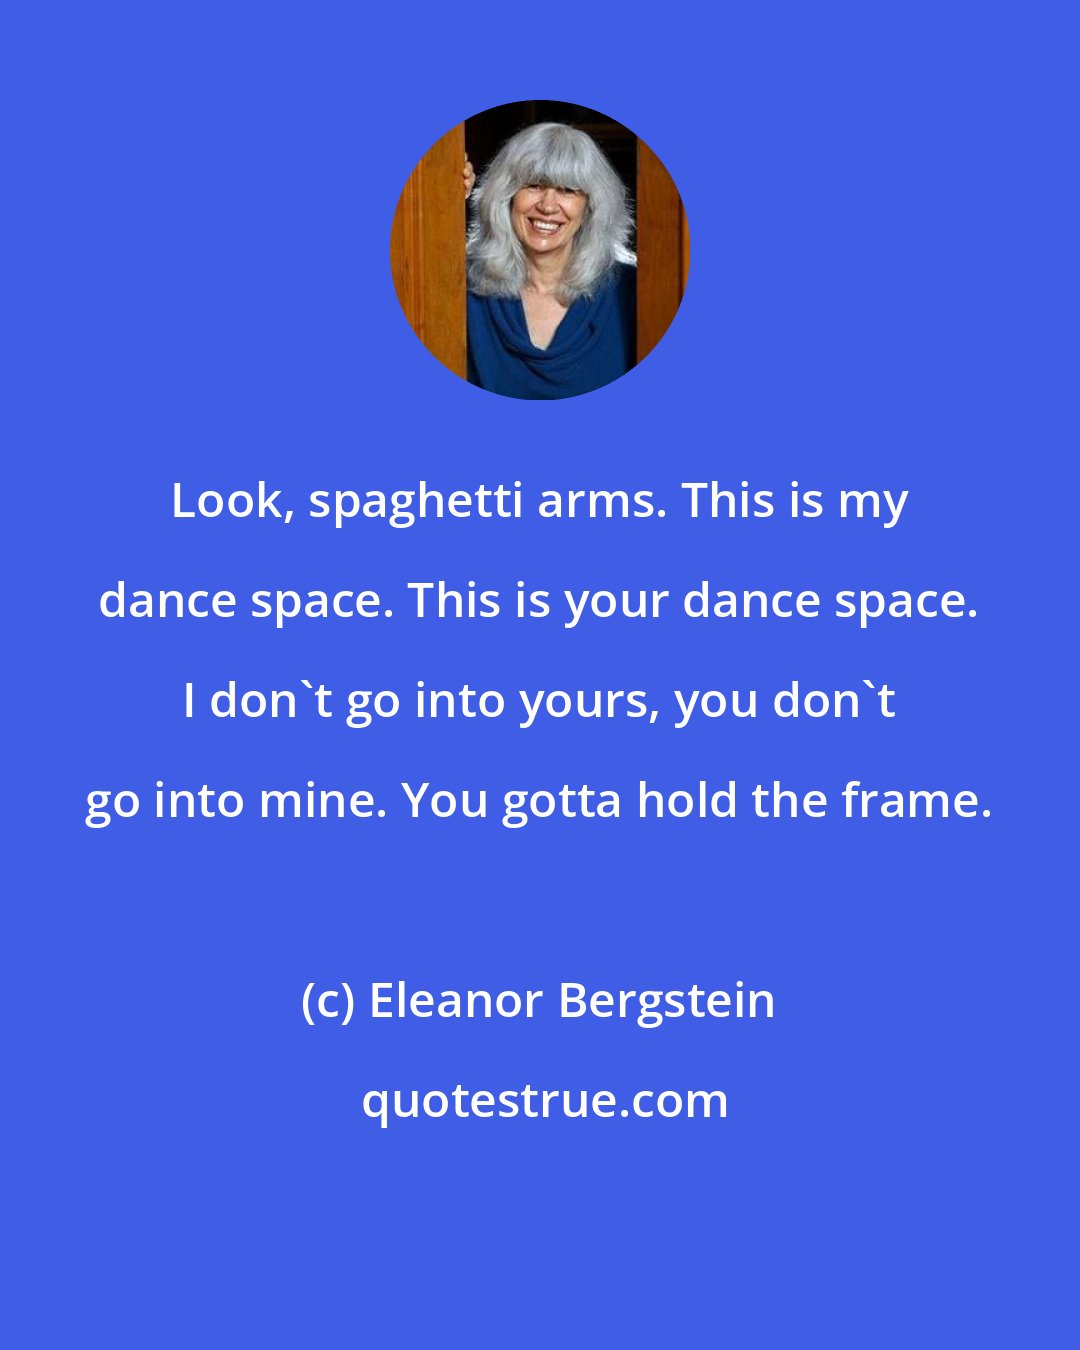 Eleanor Bergstein: Look, spaghetti arms. This is my dance space. This is your dance space. I don't go into yours, you don't go into mine. You gotta hold the frame.